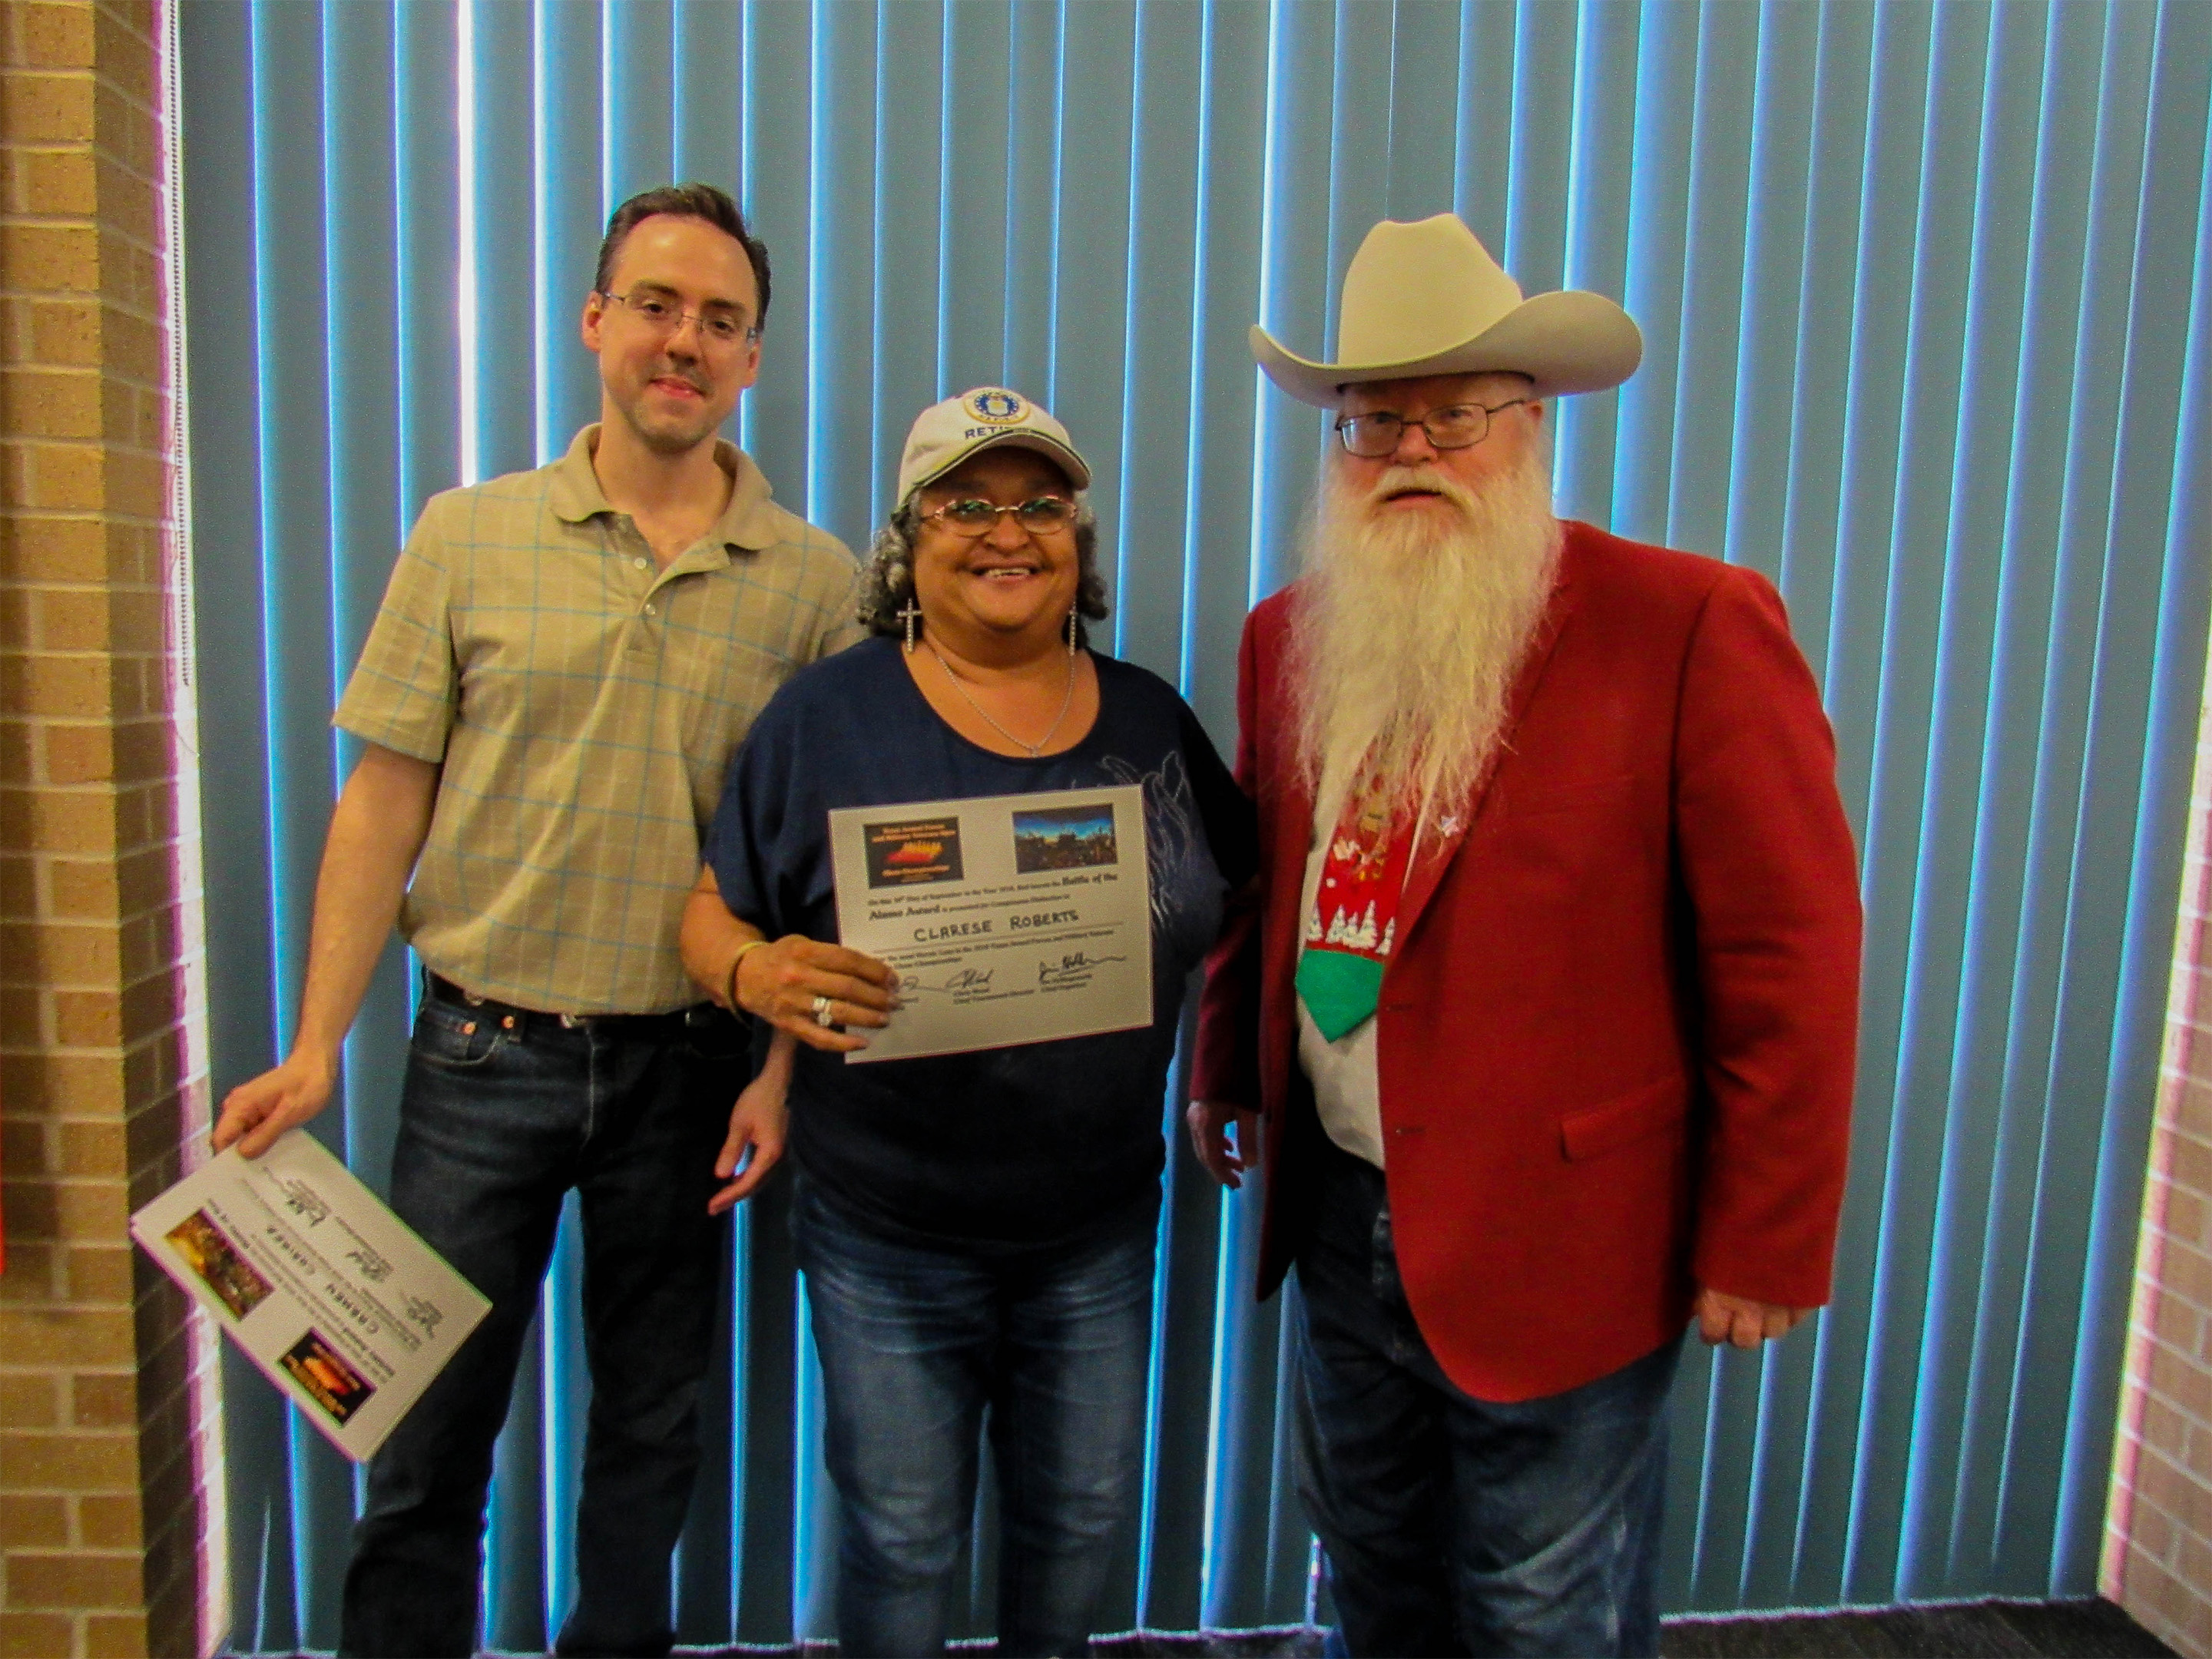 Clarese Roberts won the Battle of the Alamo Award for her incredible game against a strong expert in round one (center in the photo).  Games Judge Jeffrey Spyrison (left) and Chief Organizer Jim Hollingsworth (right) presented the award.  Photo by Sheryl McBroom.